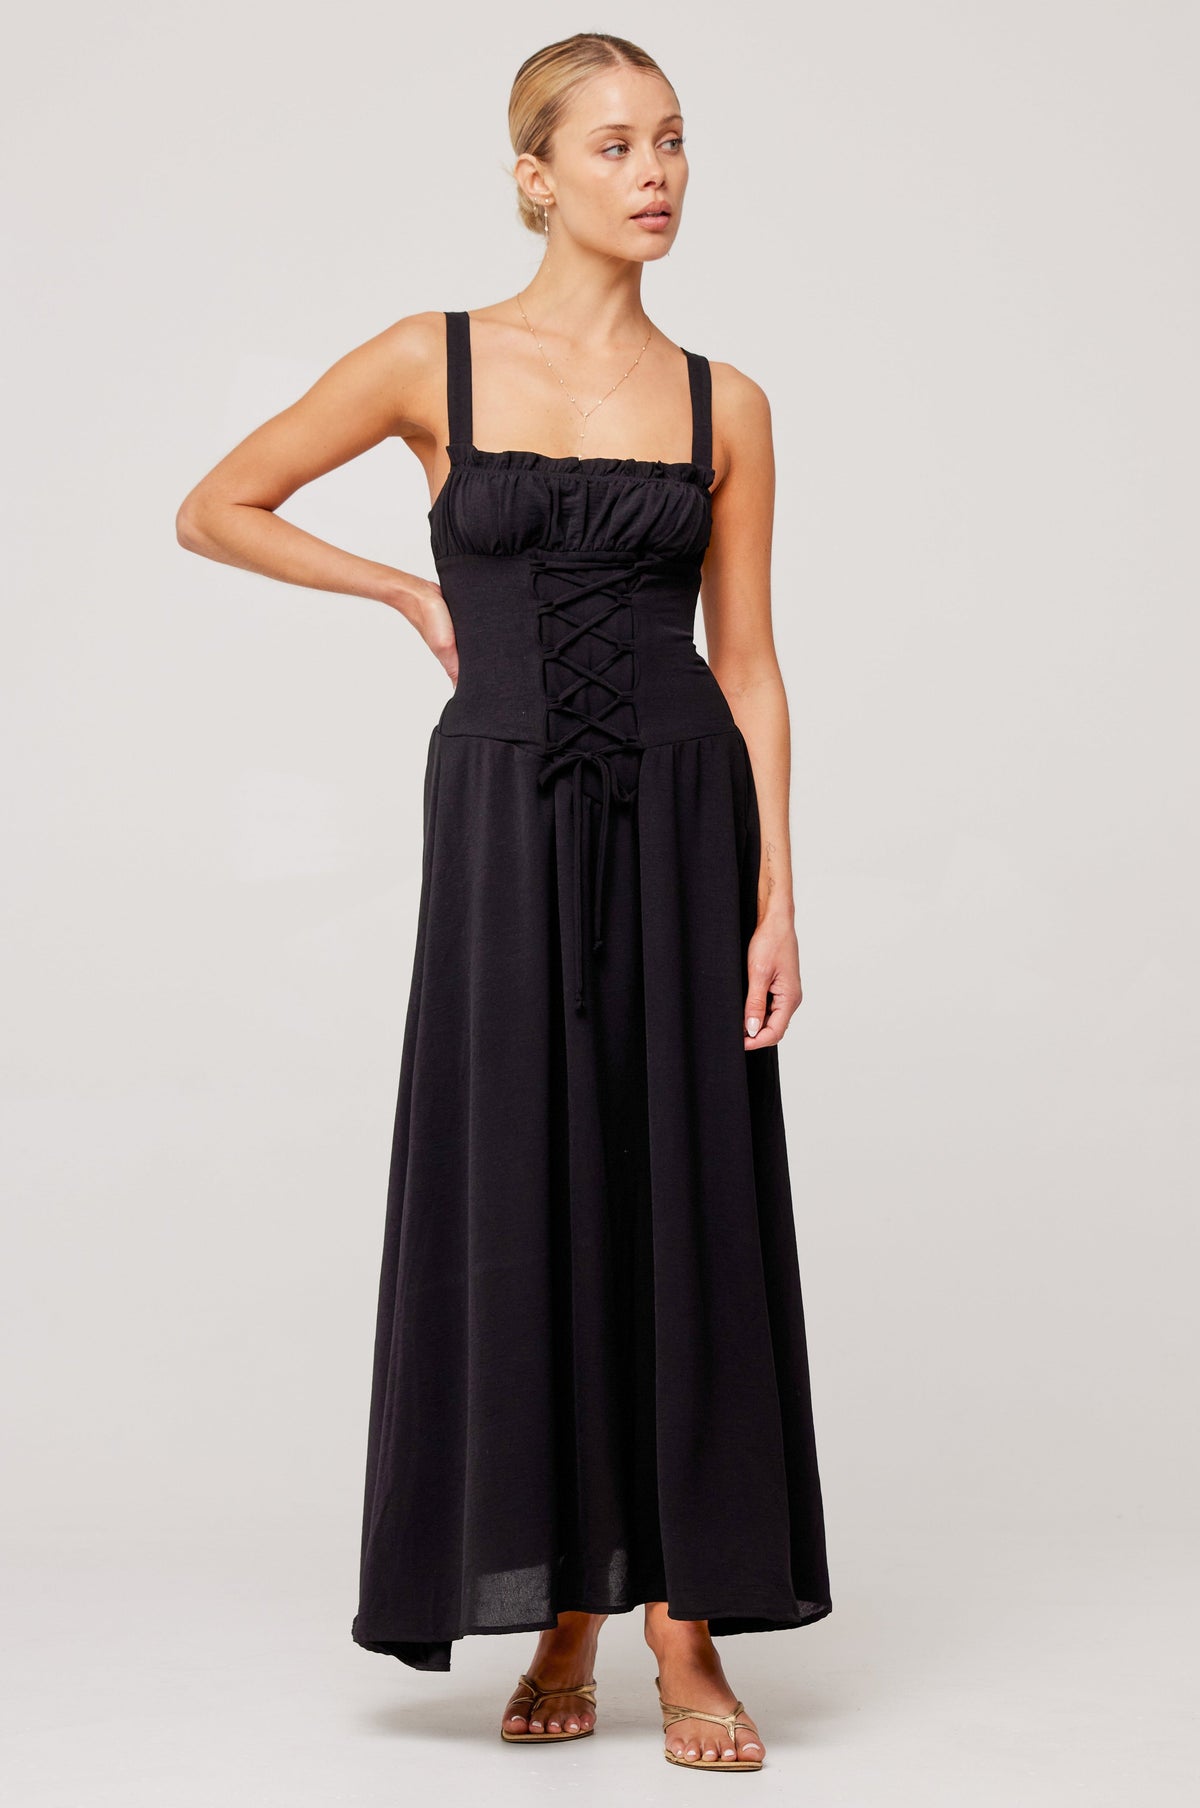 This is an image of Izzy Dress in Black - RESA featuring a model wearing the dress